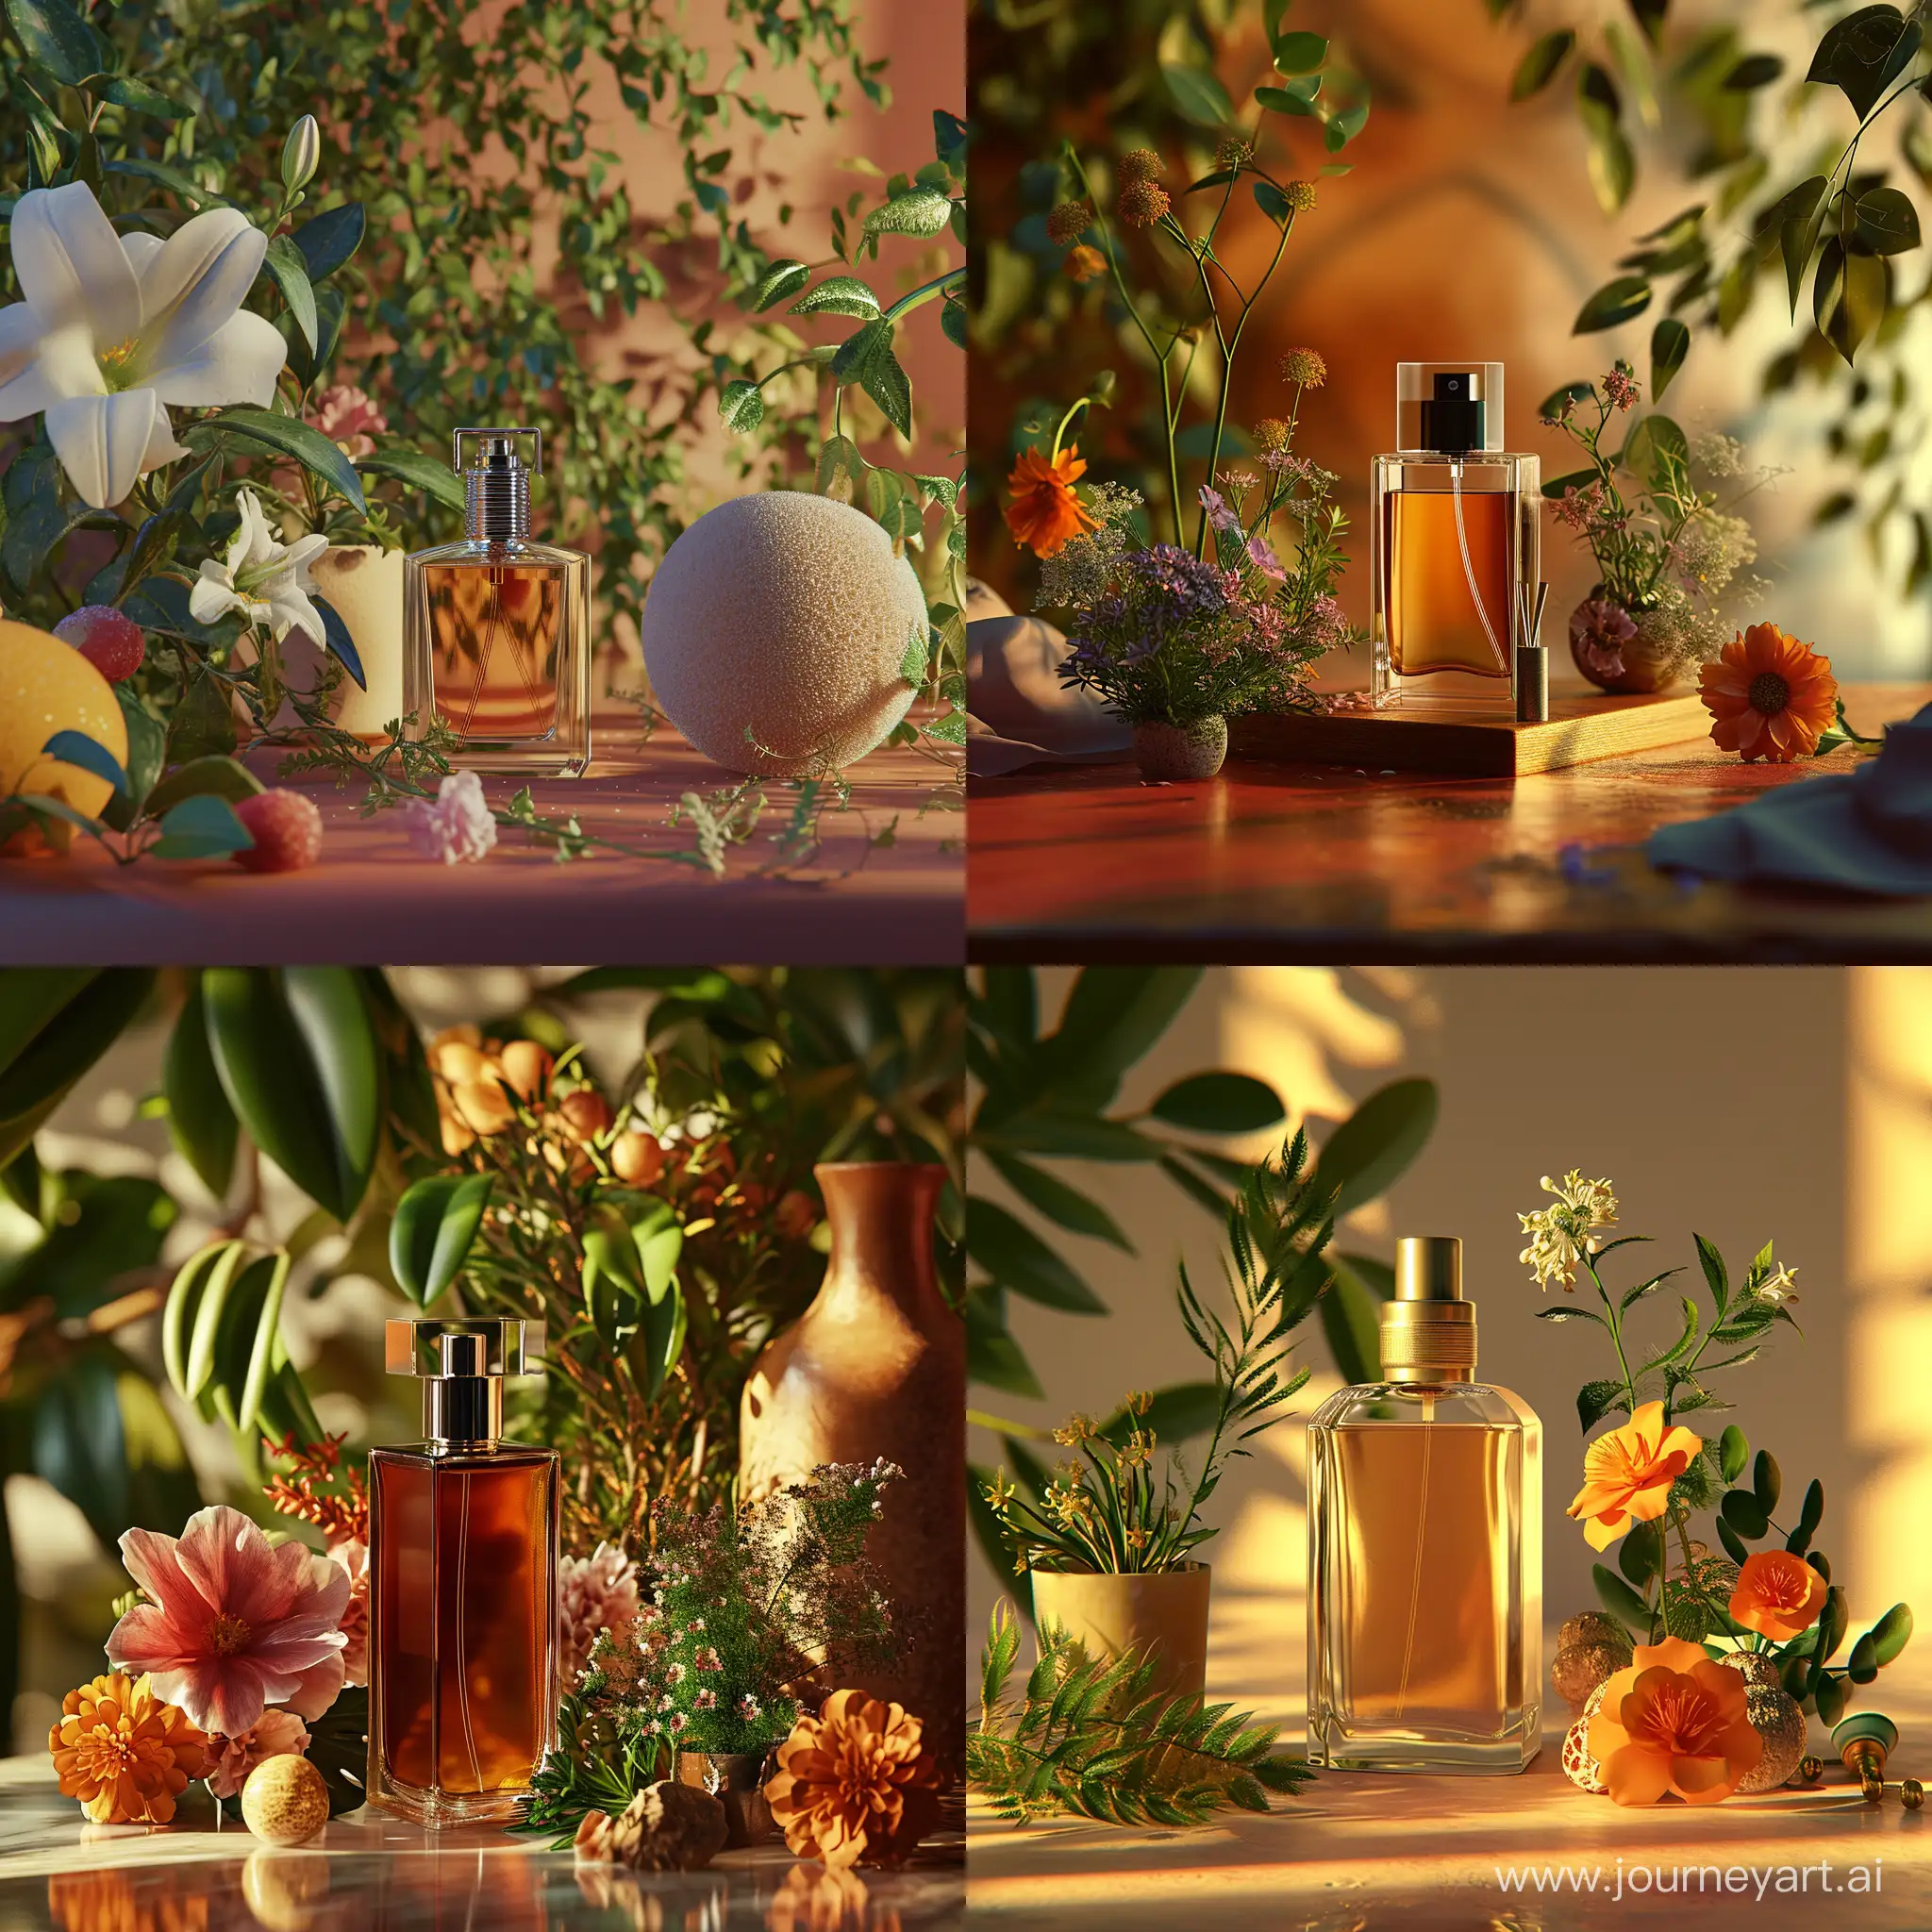 there is a bottle of perfume and flowers  and plants on a table, octain render, letterism, ori, ochre, packaging, low res, an epic non - binary model, dof, inspired by Louis Hersent, is a stunning, lamented, glamor shot, the orb of dreams, dictatorship